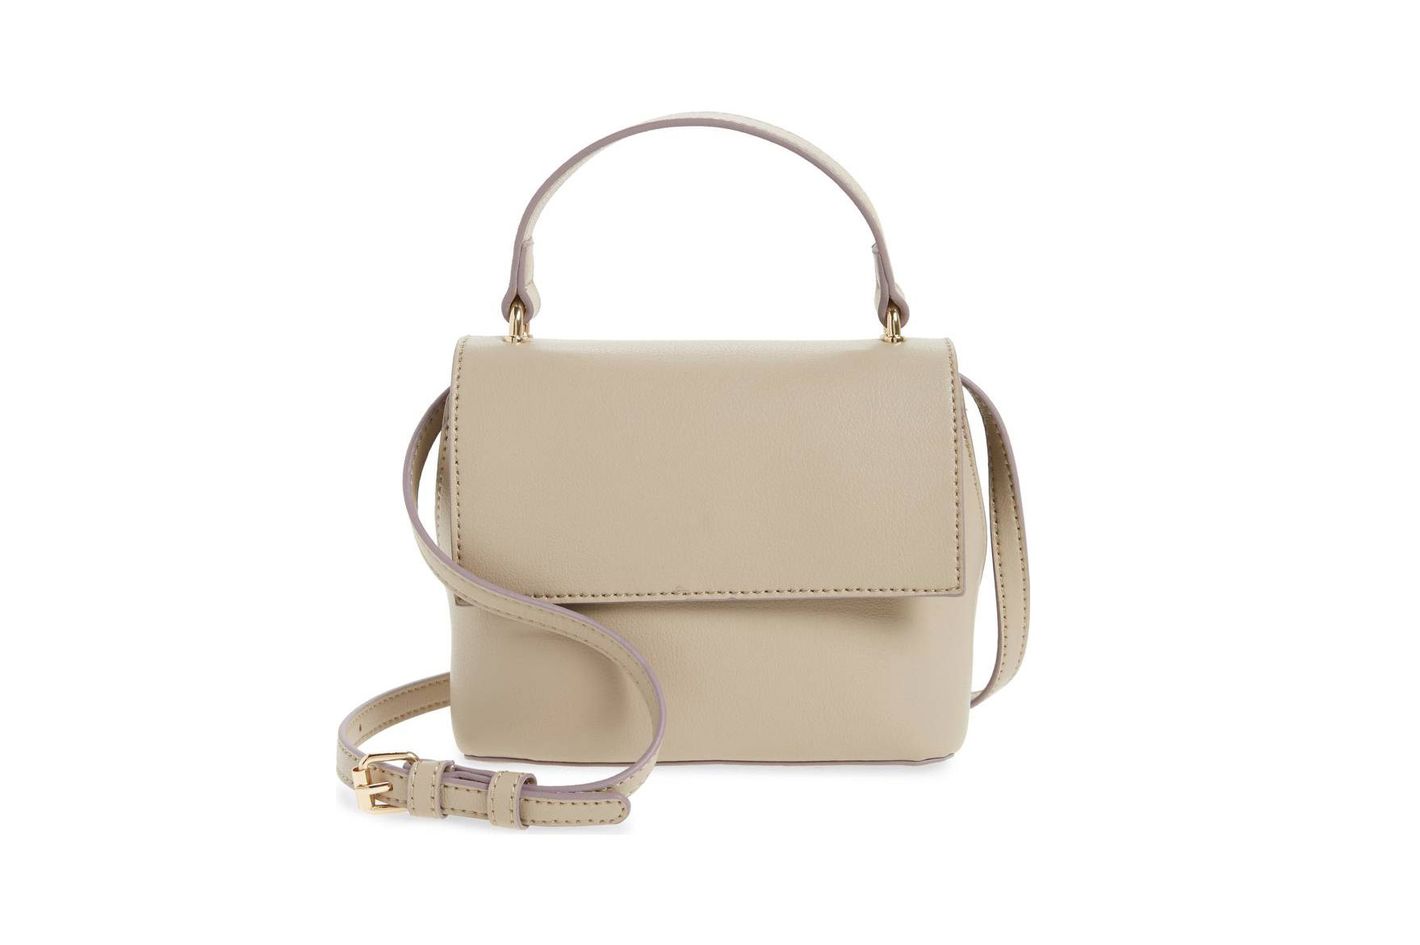 Why Mini Bags Are Spring's Prettiest Trend